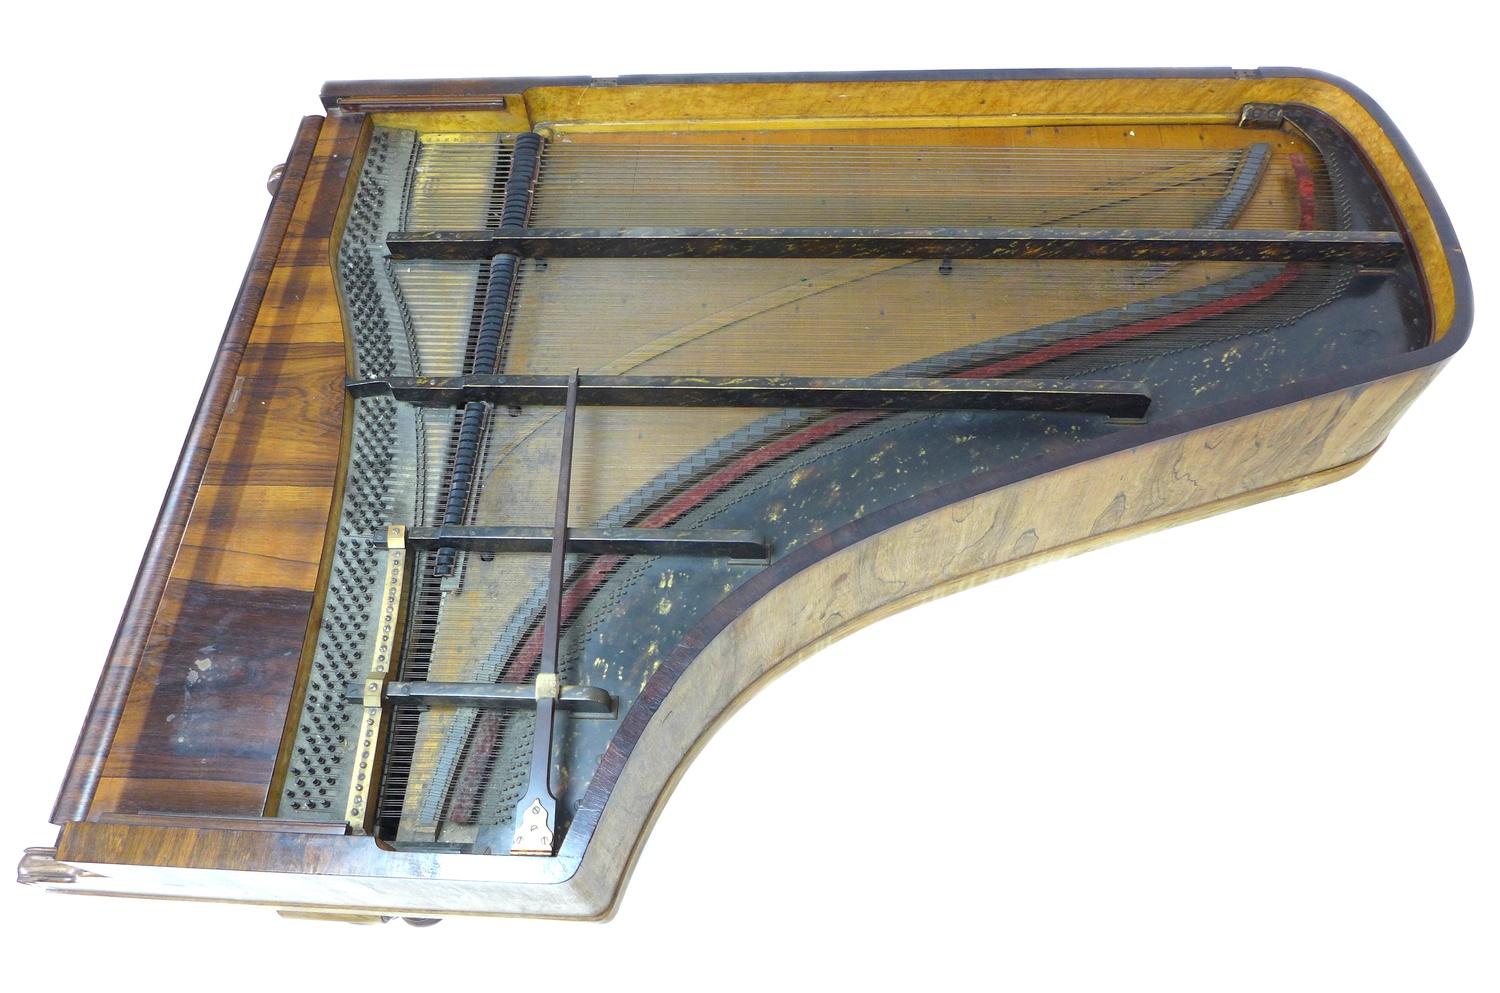 A Victorian Kirkman parlour grand piano, circa 1870, with rosewood veneered case, wooden frame and - Image 5 of 19